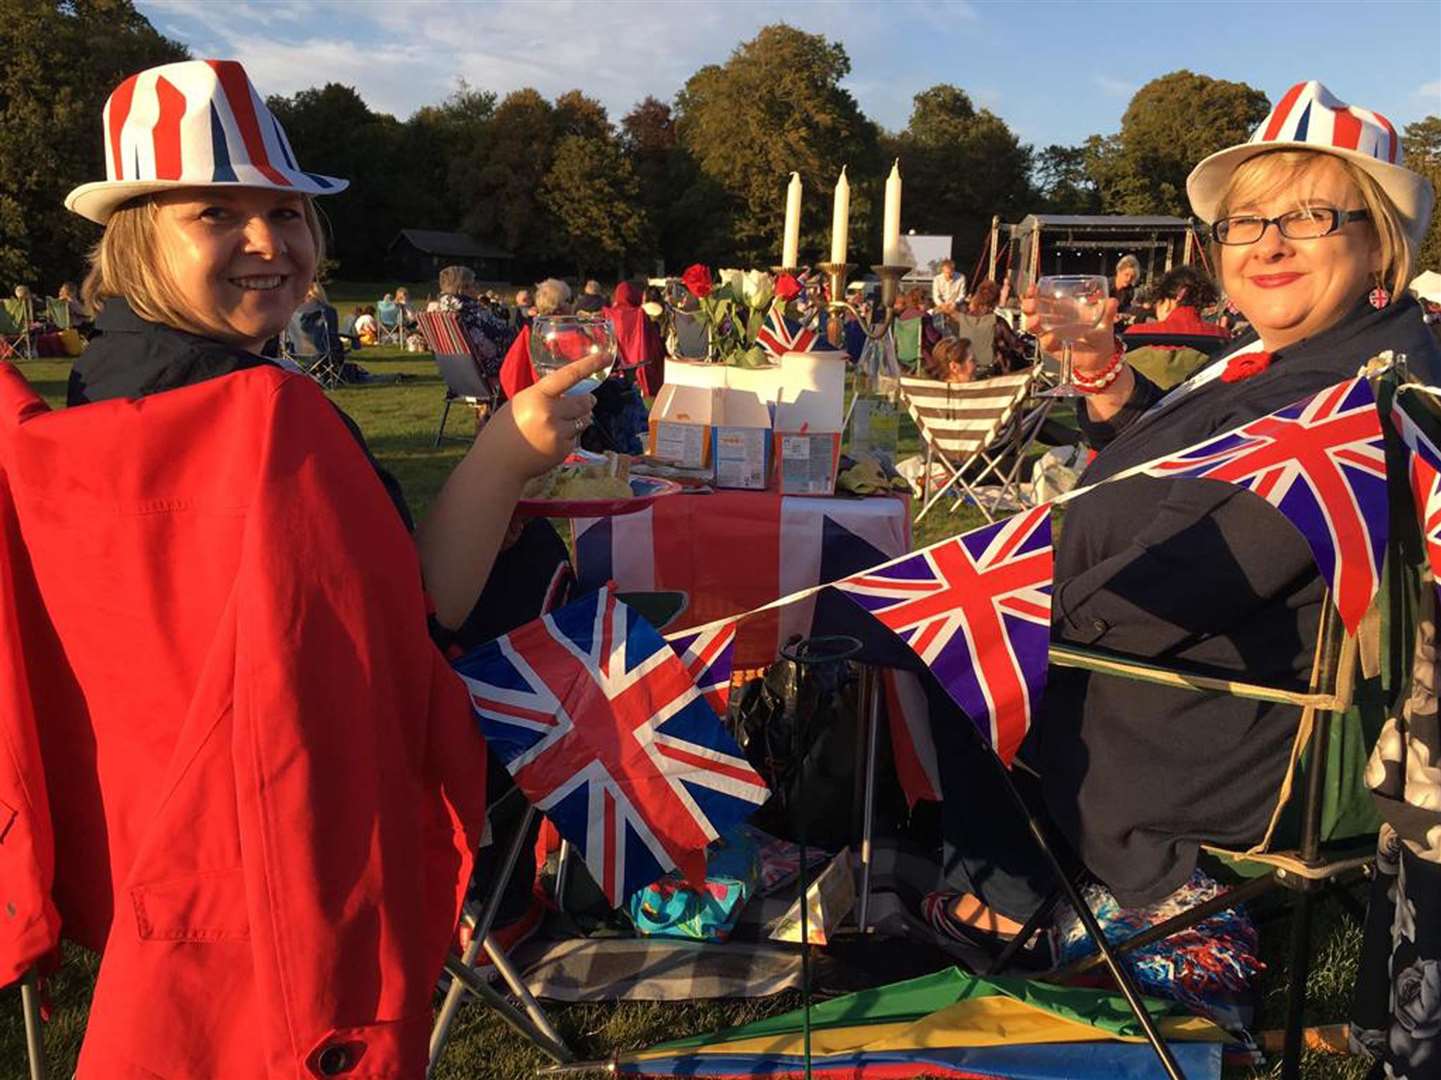 Open air proms will return to Hole Park Gardens